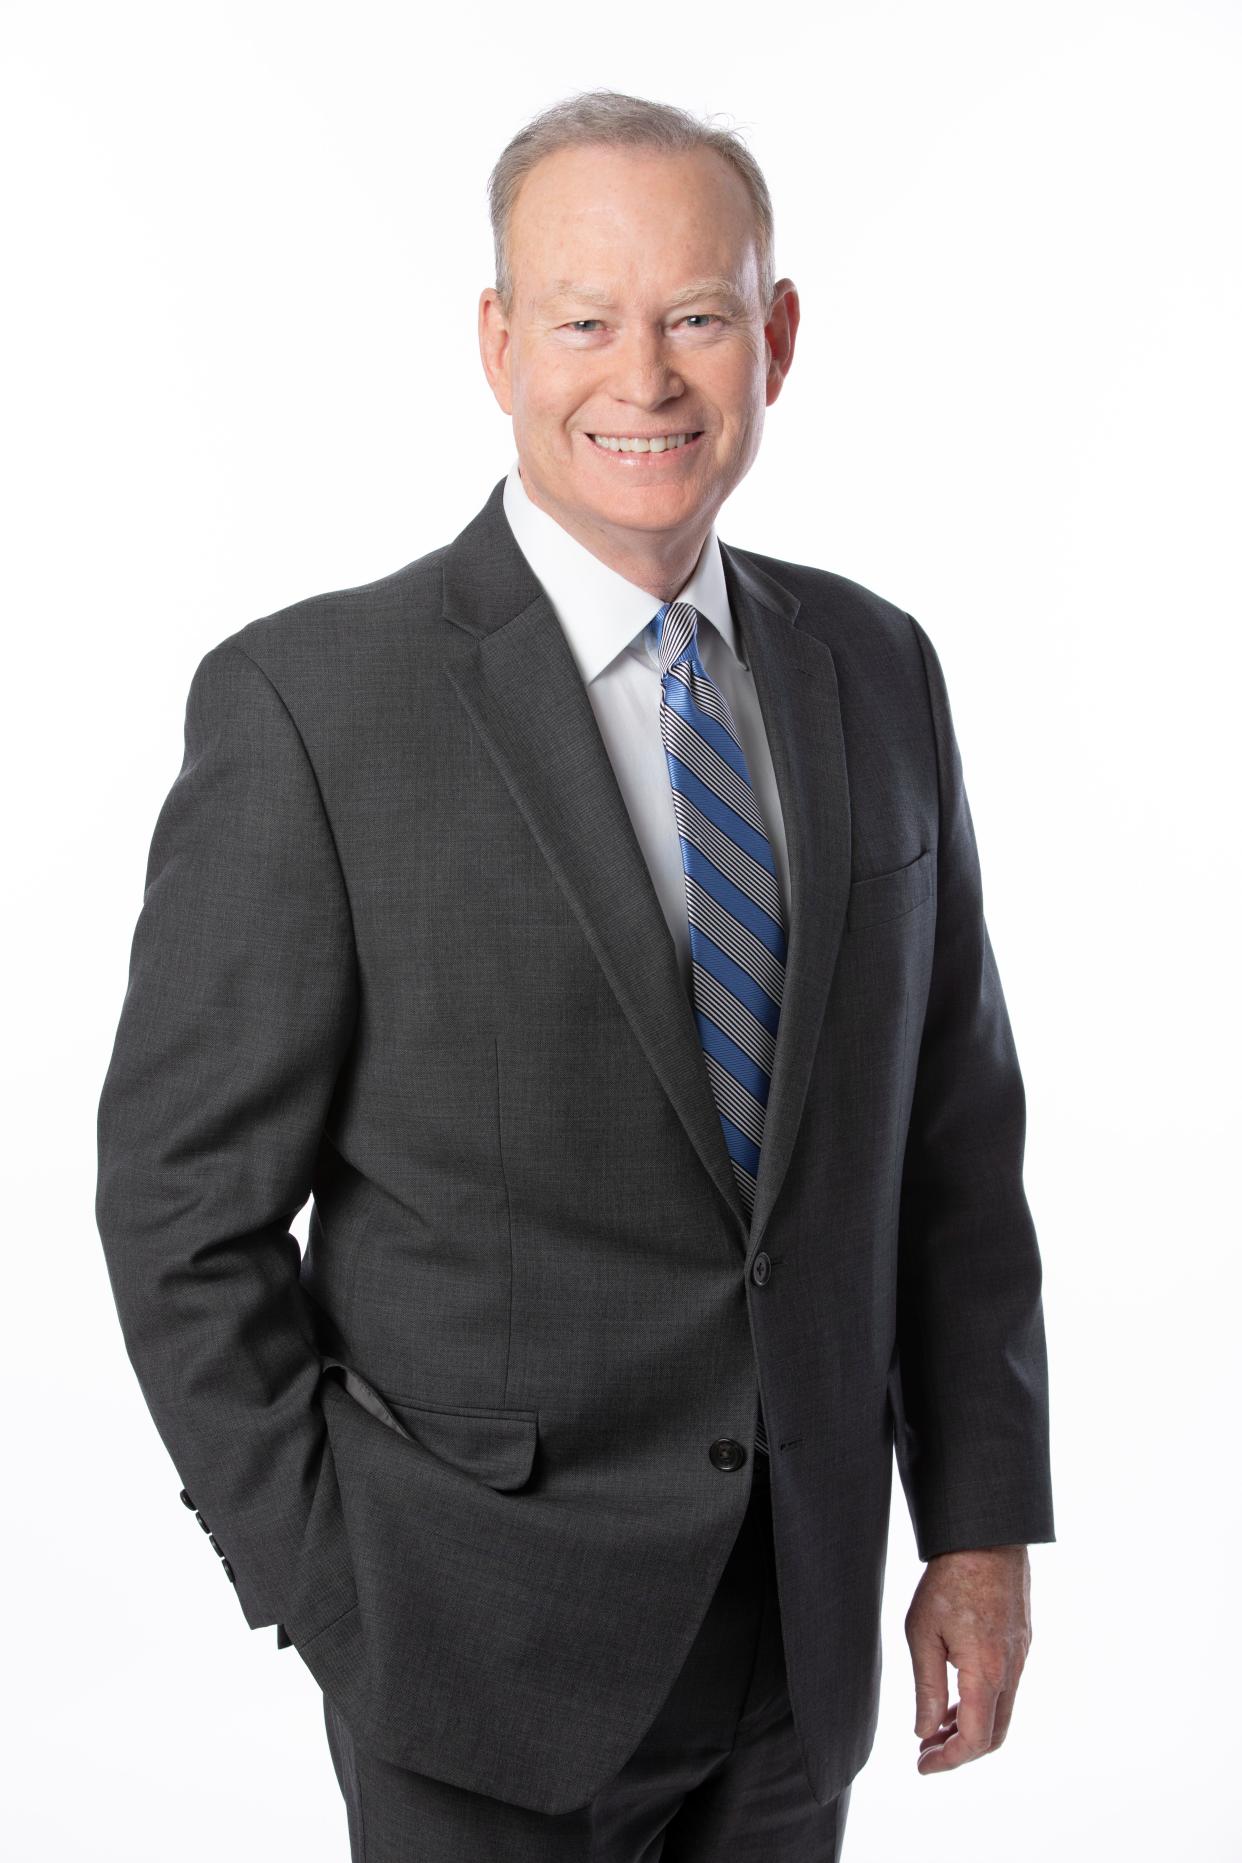 Mick Cornett is a former mayor of Oklahoma City (2004-2018) and the first to win four consecutive terms. He is the author of "The Next American City."